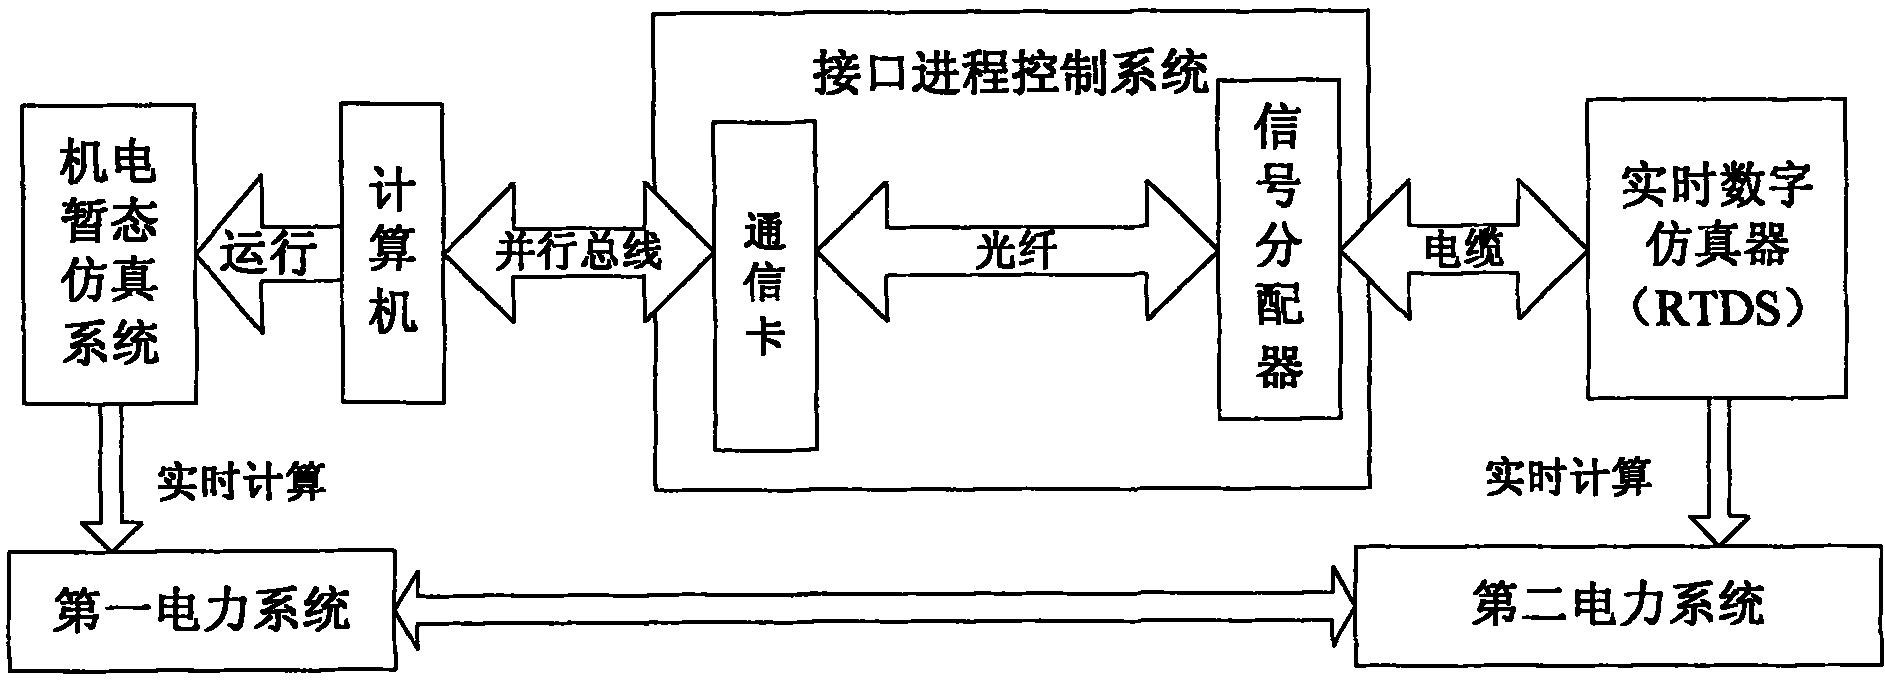 Electromagnetic transient-state and electromechanical transient-state mixed real-time simulation interface process control system